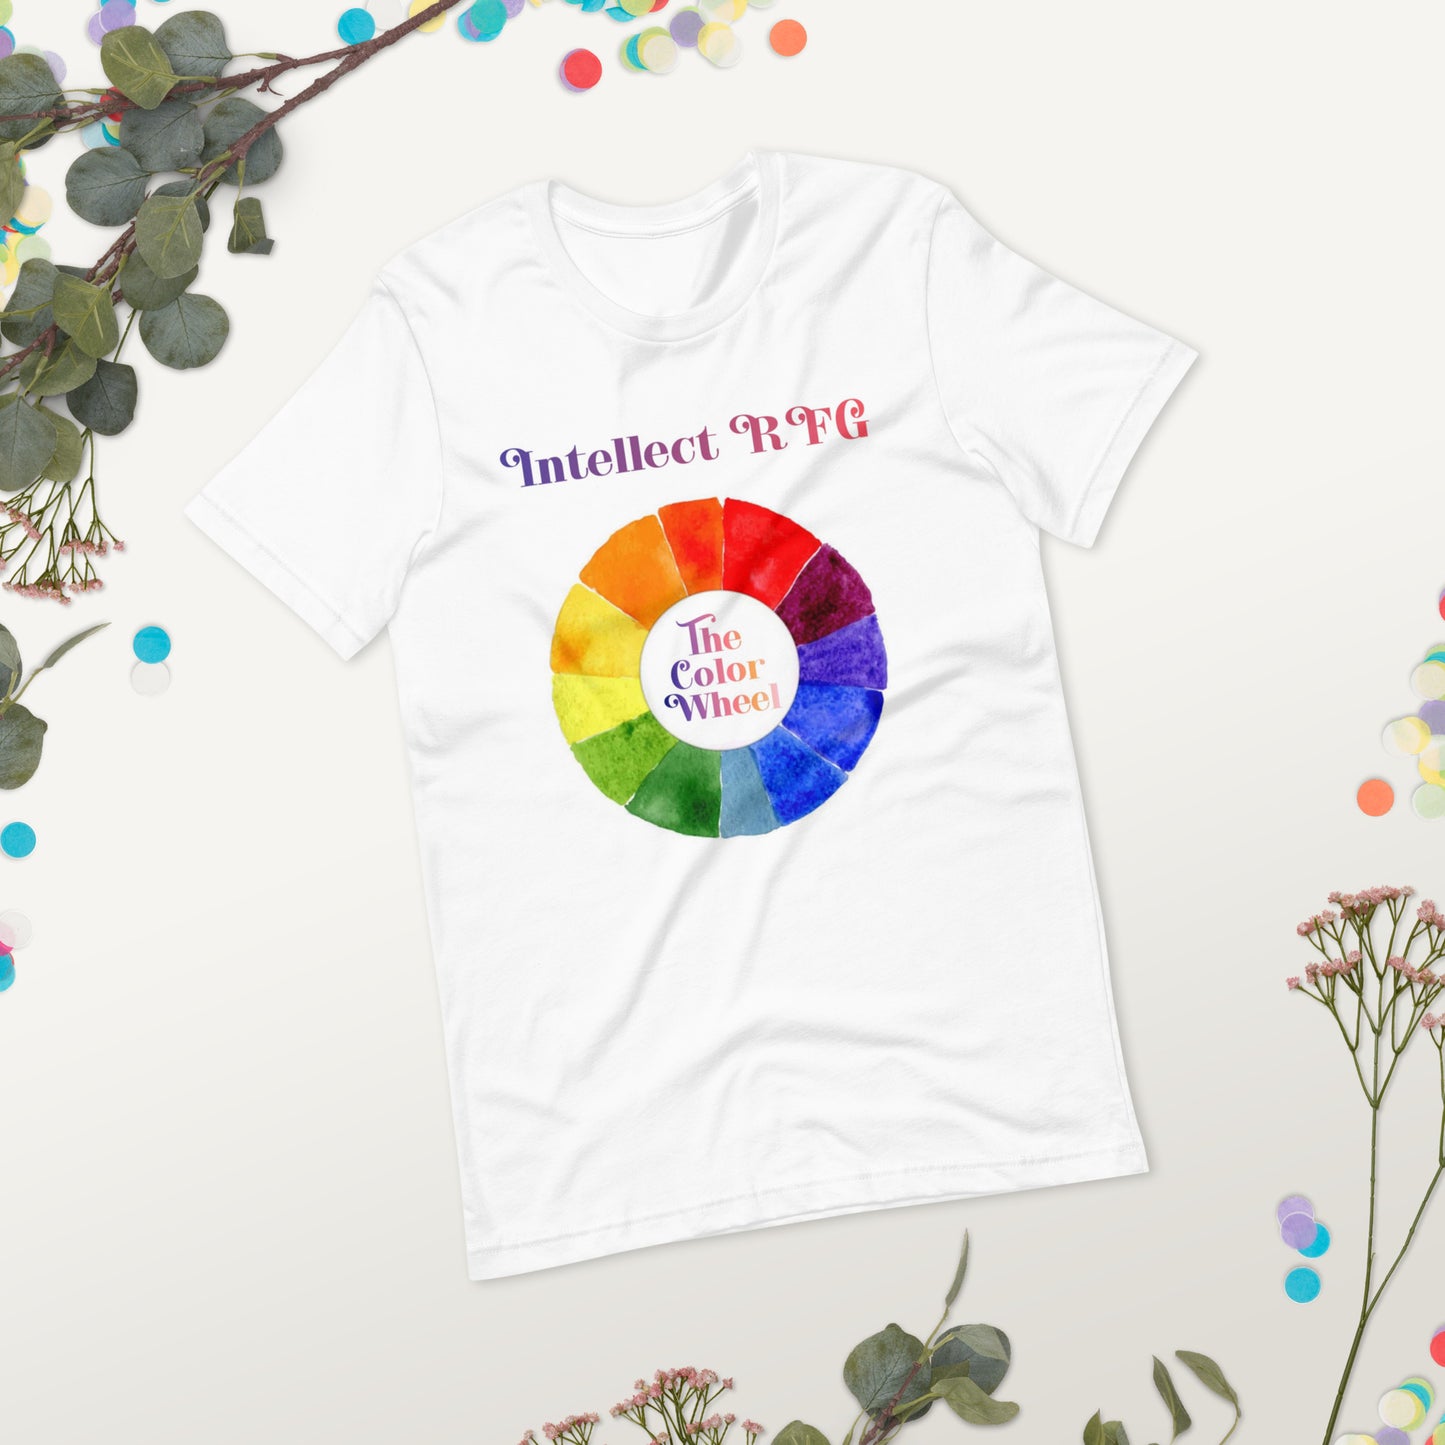 The Color Wheel Tee